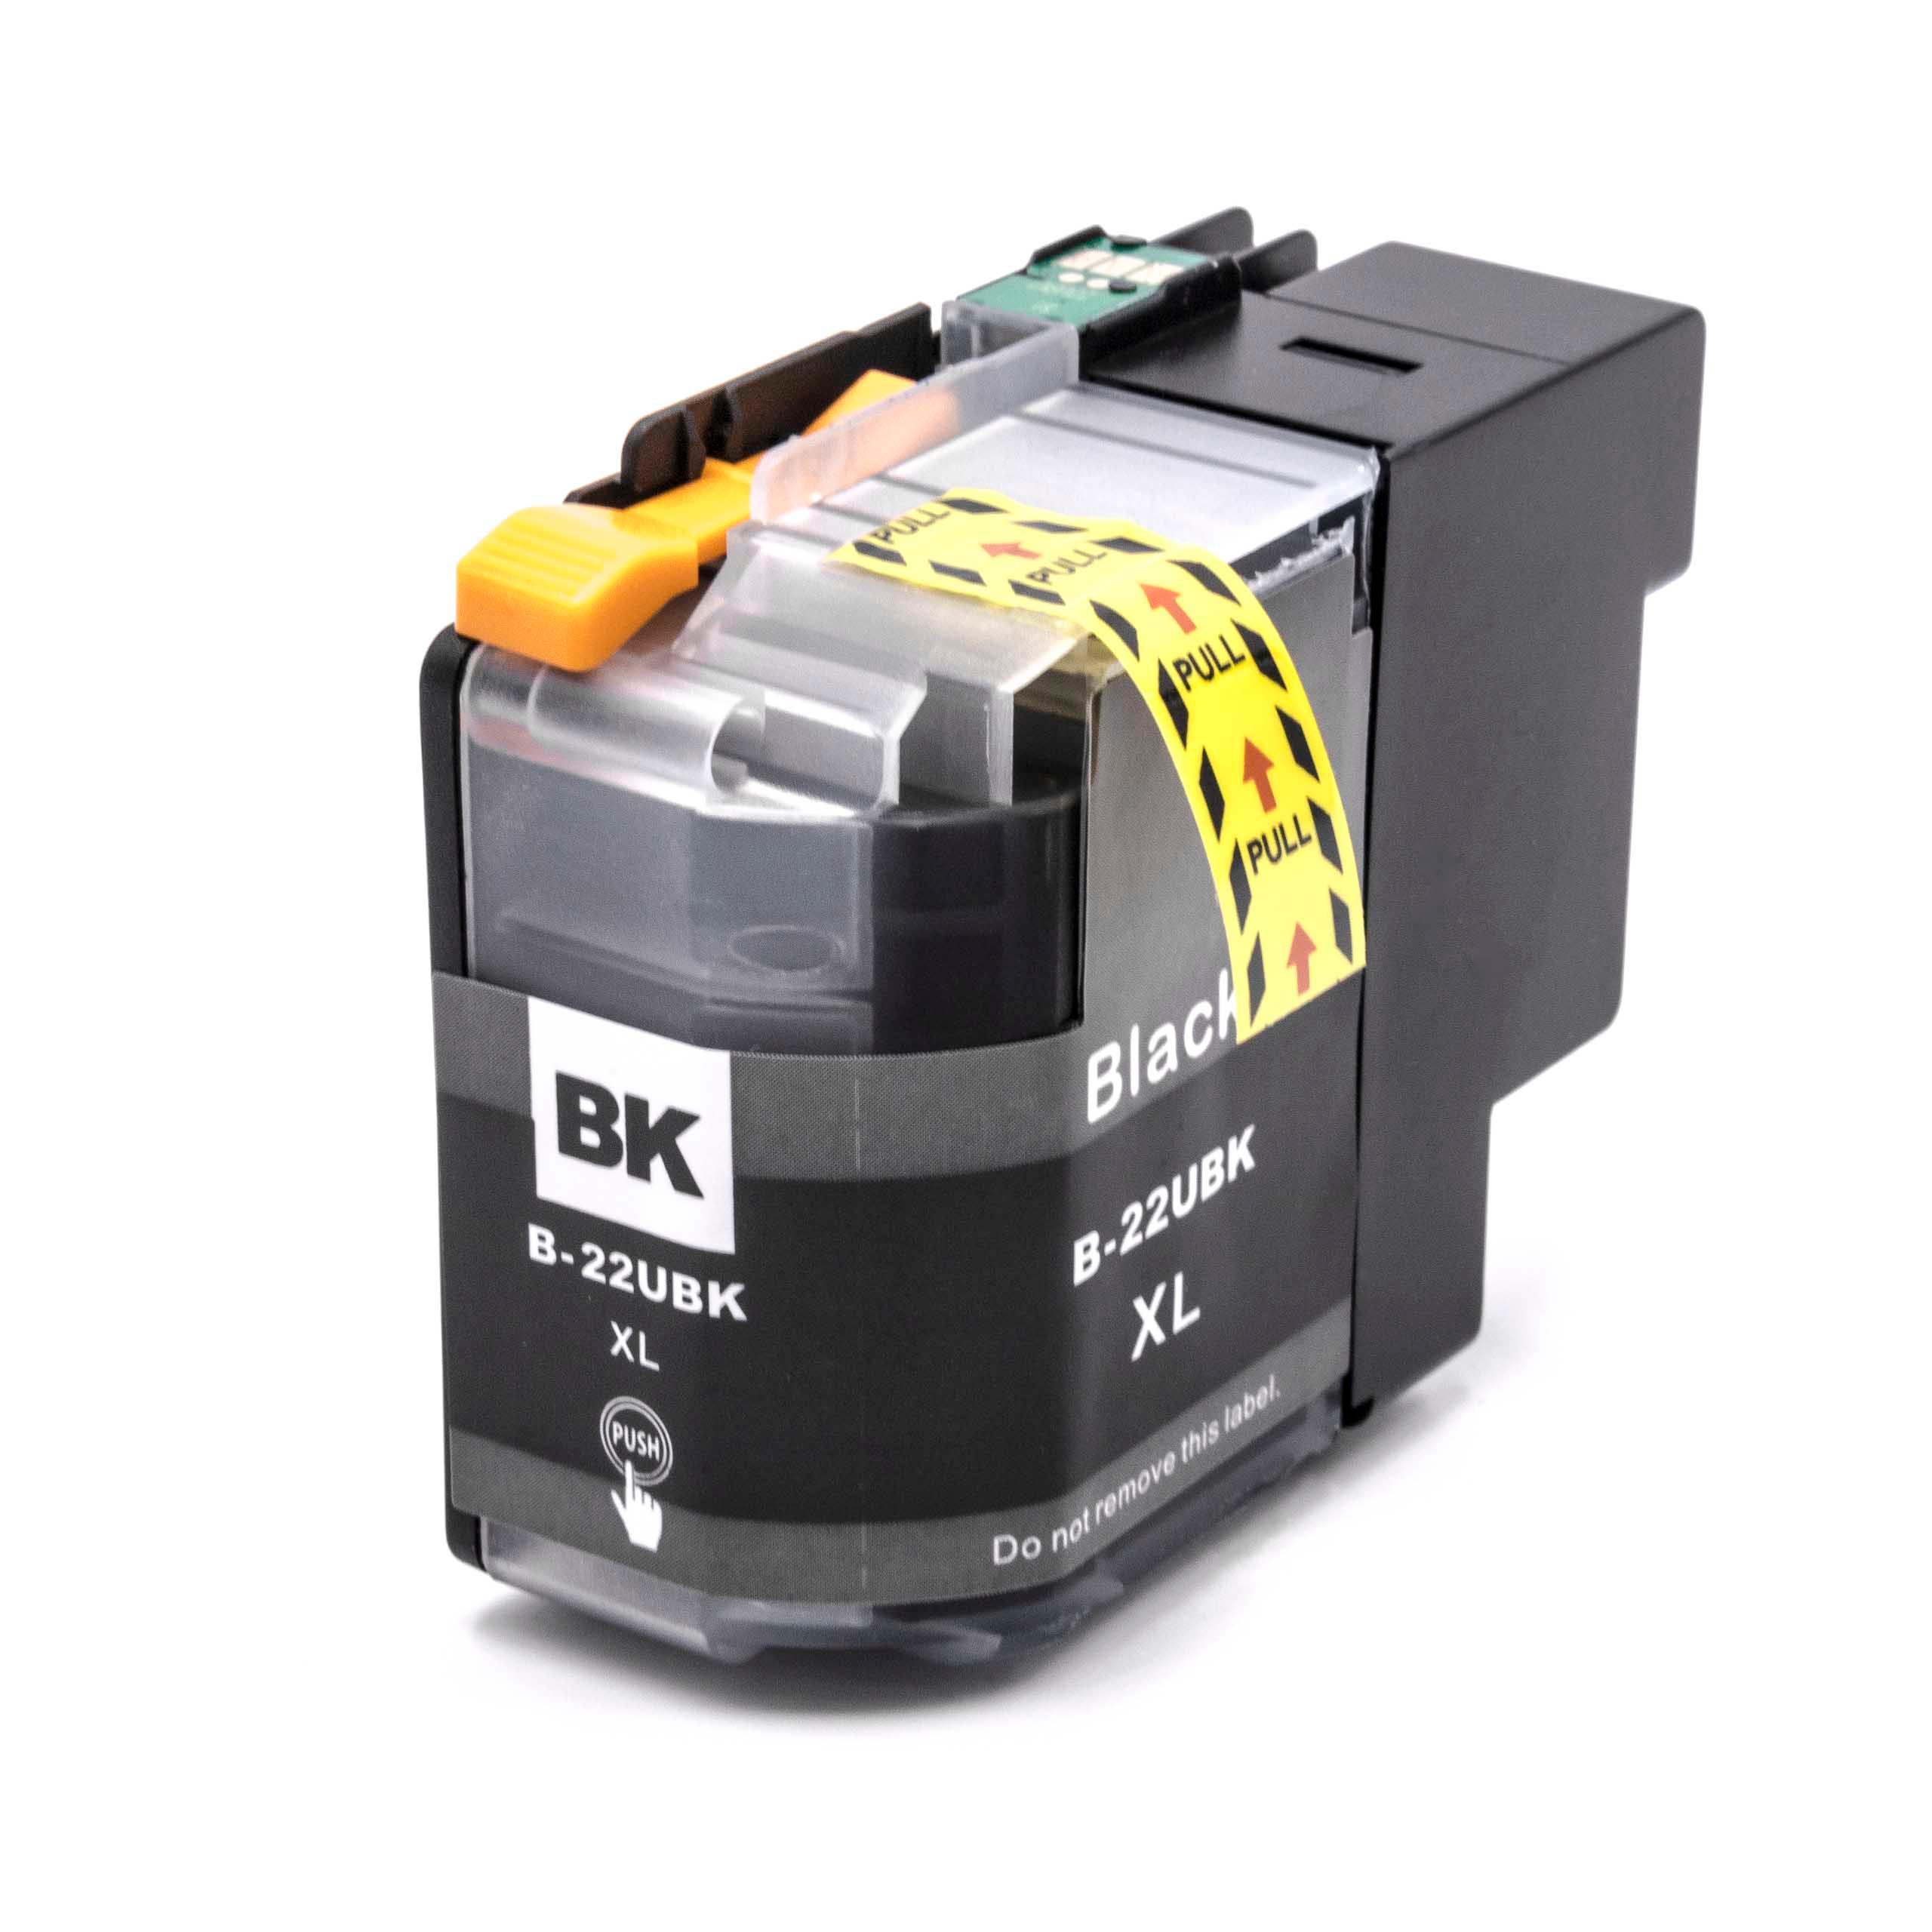 Ink Cartridge as Exchange for Brother LC22UBK, LC-22UBK for Brother Printer - Black 58 ml + Chip